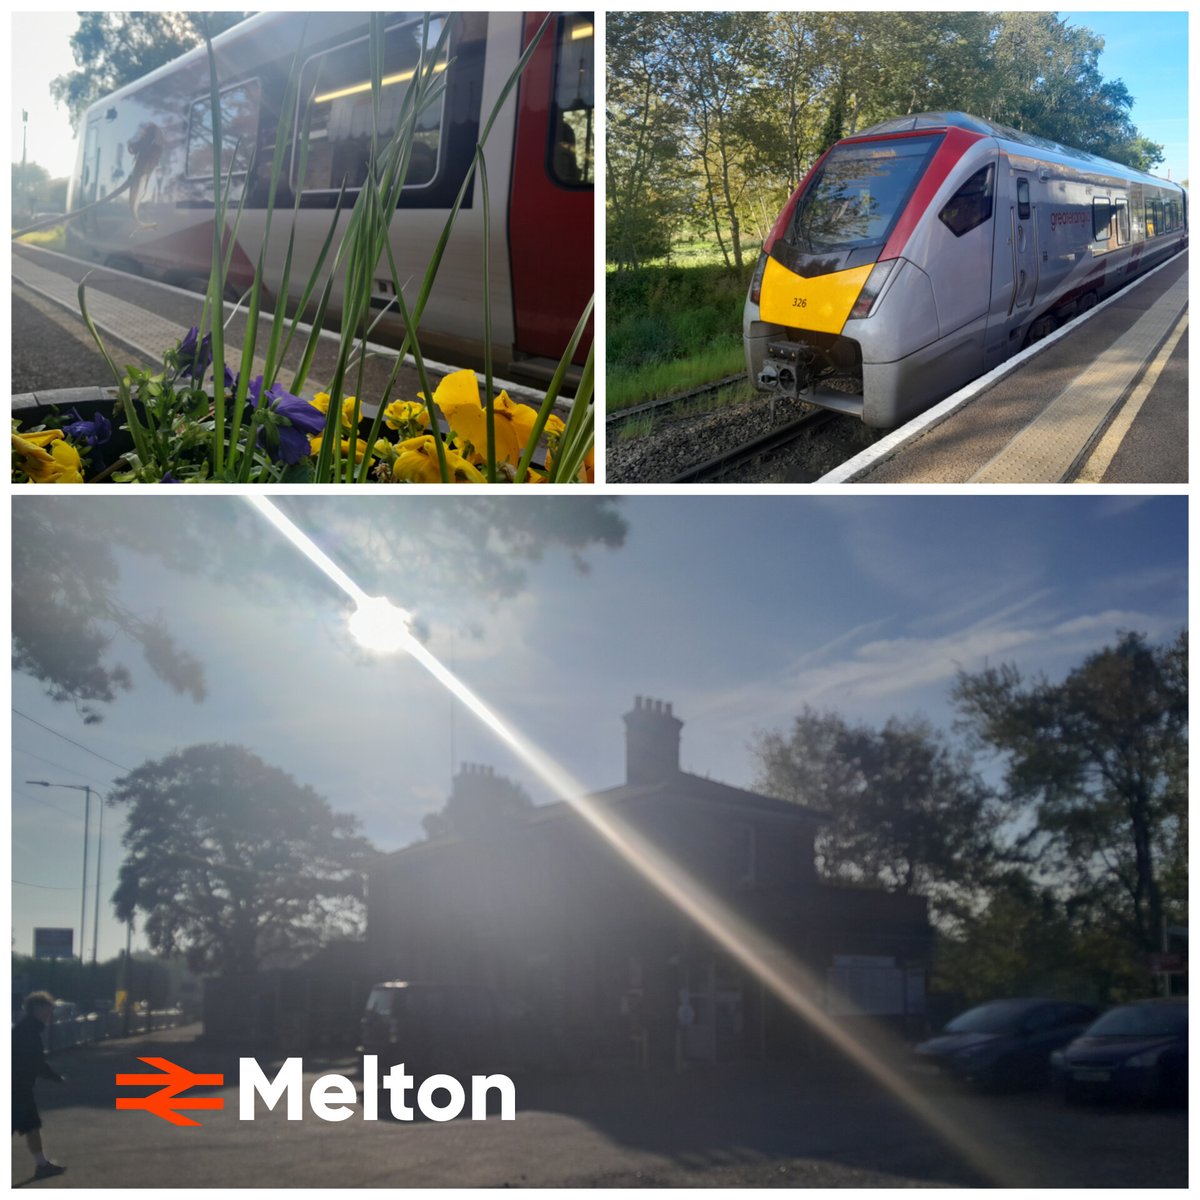 Happy Friday from @greateranglia #Melton where the sun's so bright you gotta wear shades! How much do we owe the @metoffice for this fantastic weather?